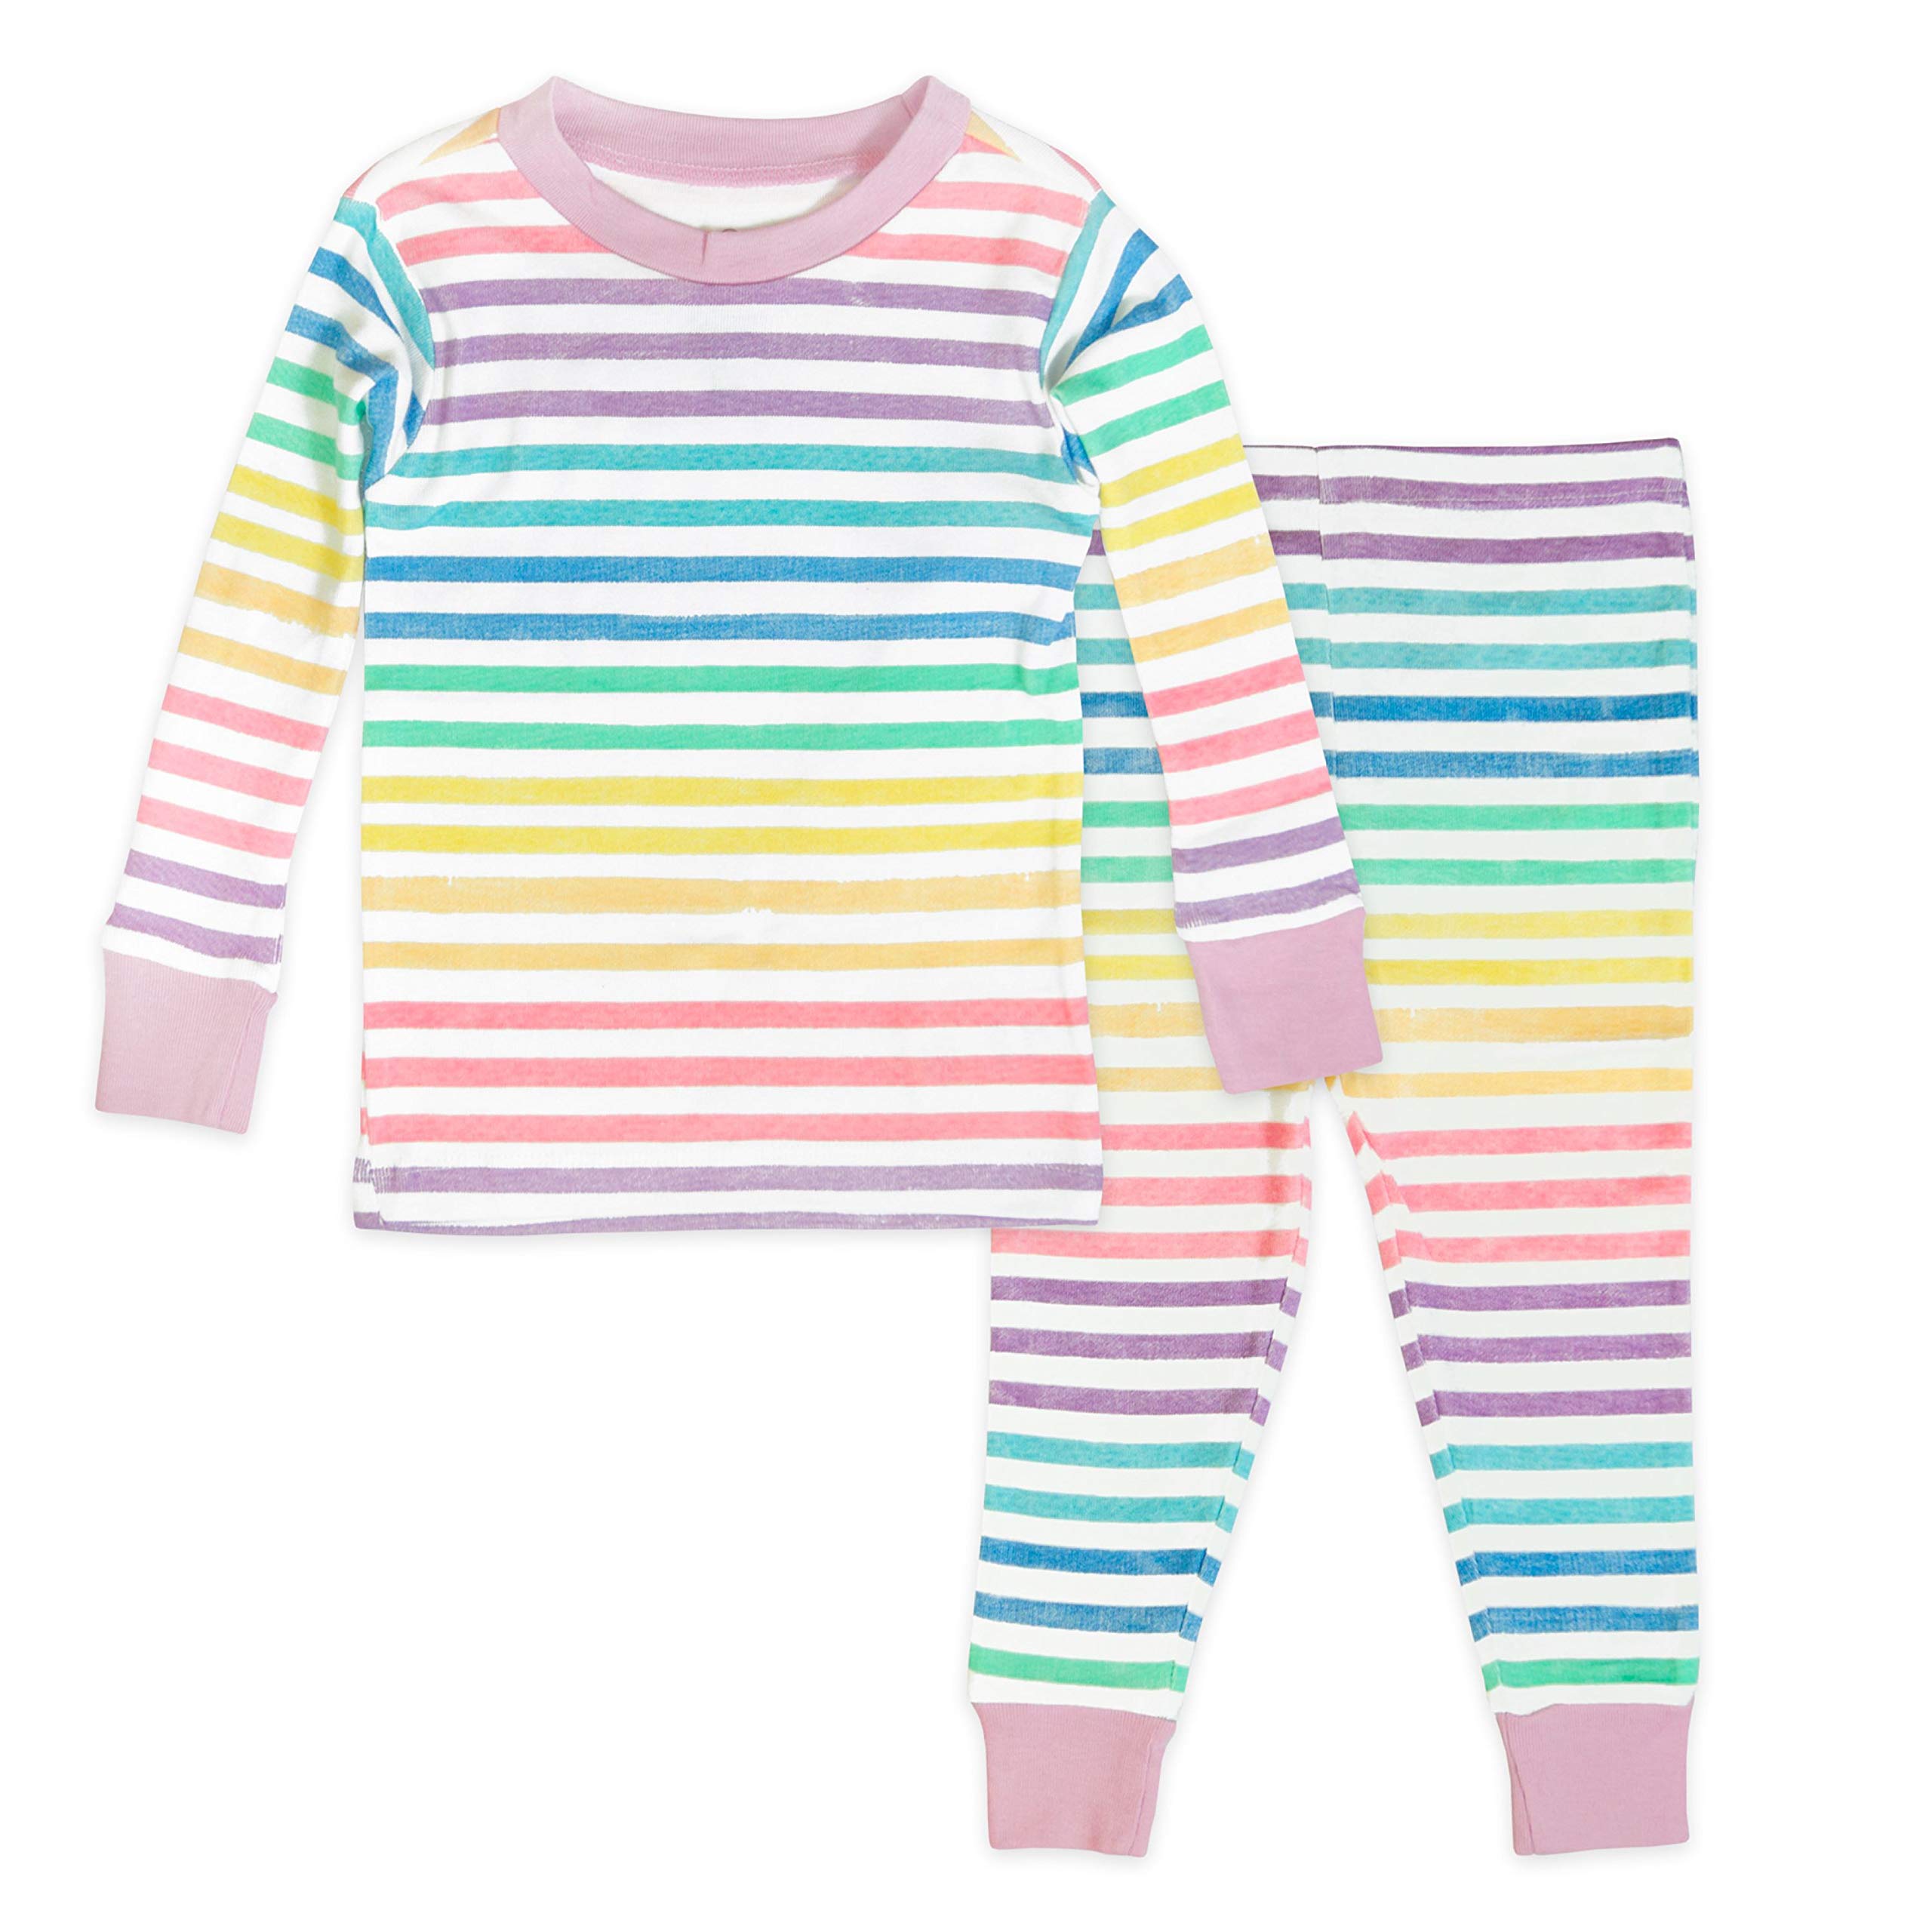 HonestBaby Multipack 2-Piece Pajamas Sleepwear PJs 100% Organic Cotton for Infant Baby and Toddler Girls, Rainbow Stripe, 24 Months